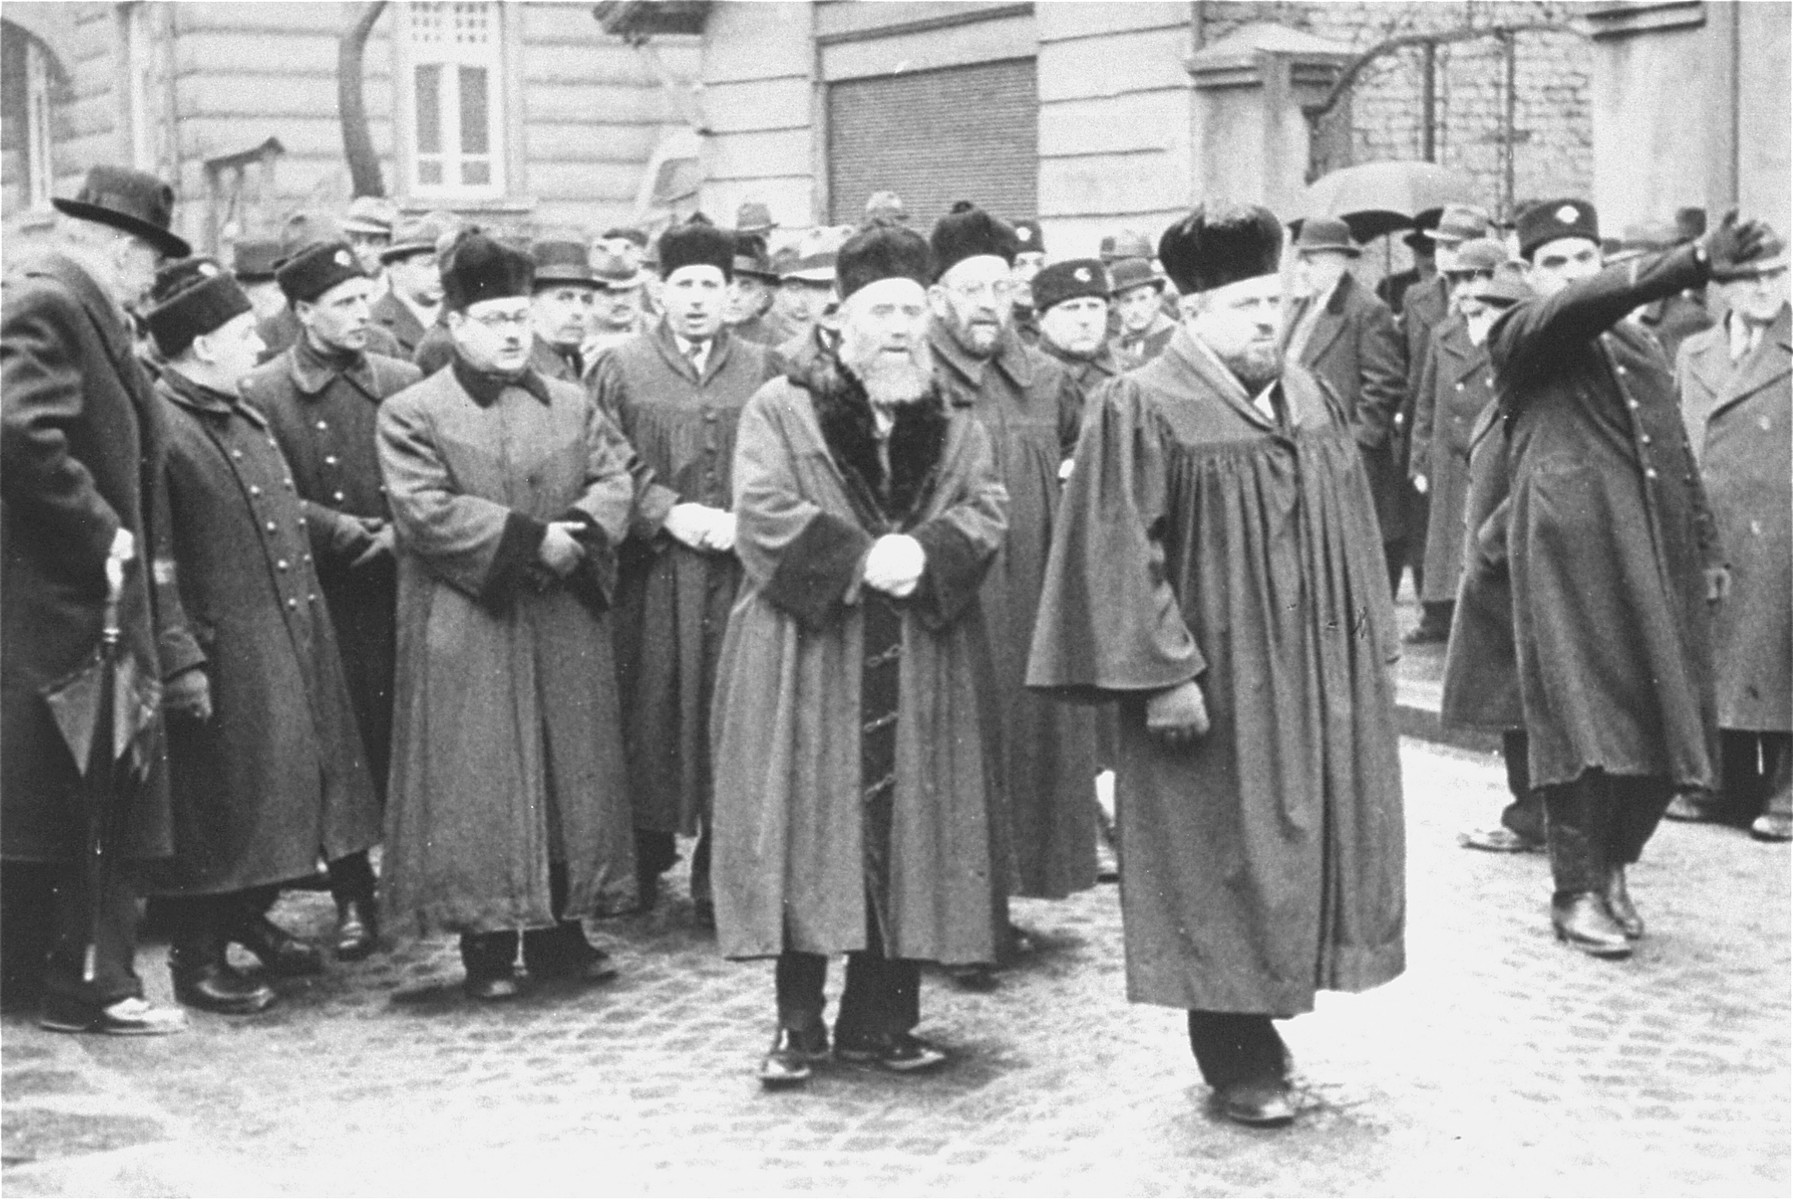 Dr. Asher Hananel, Chief Rabbi of Sofia (at the right in the foreground), leads a funeral procession for Nissim Yasharoff (the donor's grandfather) through the streets of Sofia.  The funeral took place a few days after the arrival of German troops in Bulgaria.

Also pictured is Rabbi Daniel Zion, Chief Rabbi of Bulgaria.